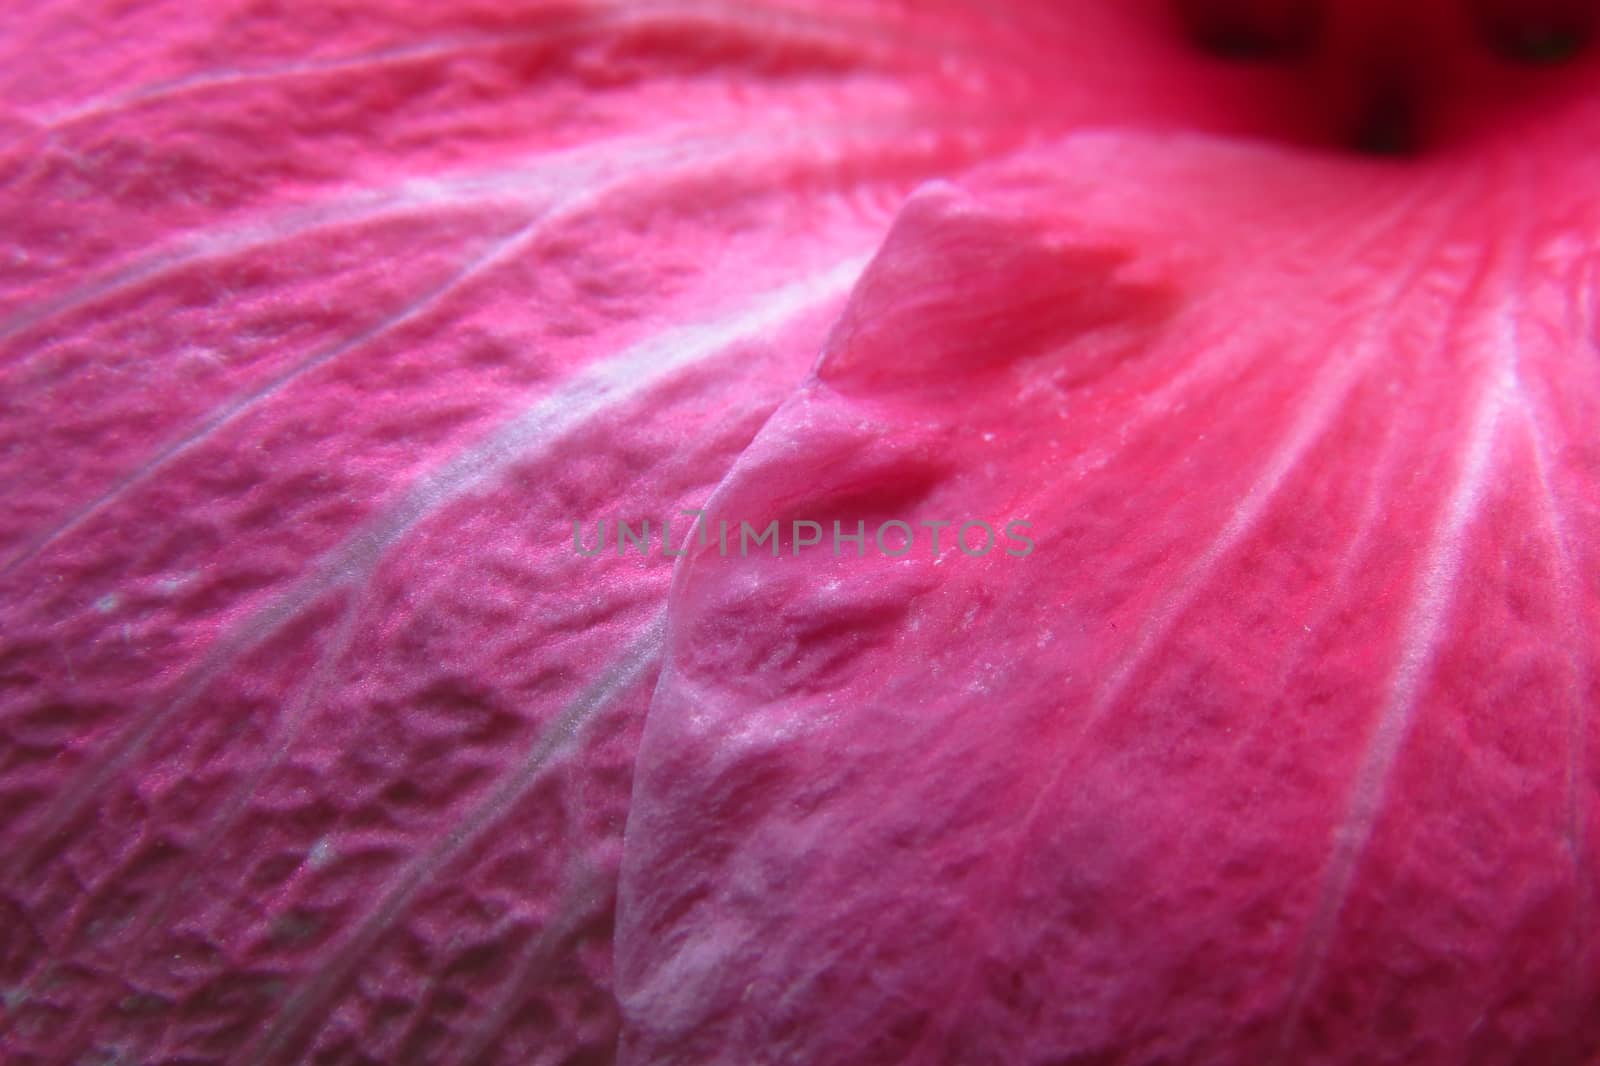 A background of beautiful petal texture of a pink flower showing by thefinalmiracle